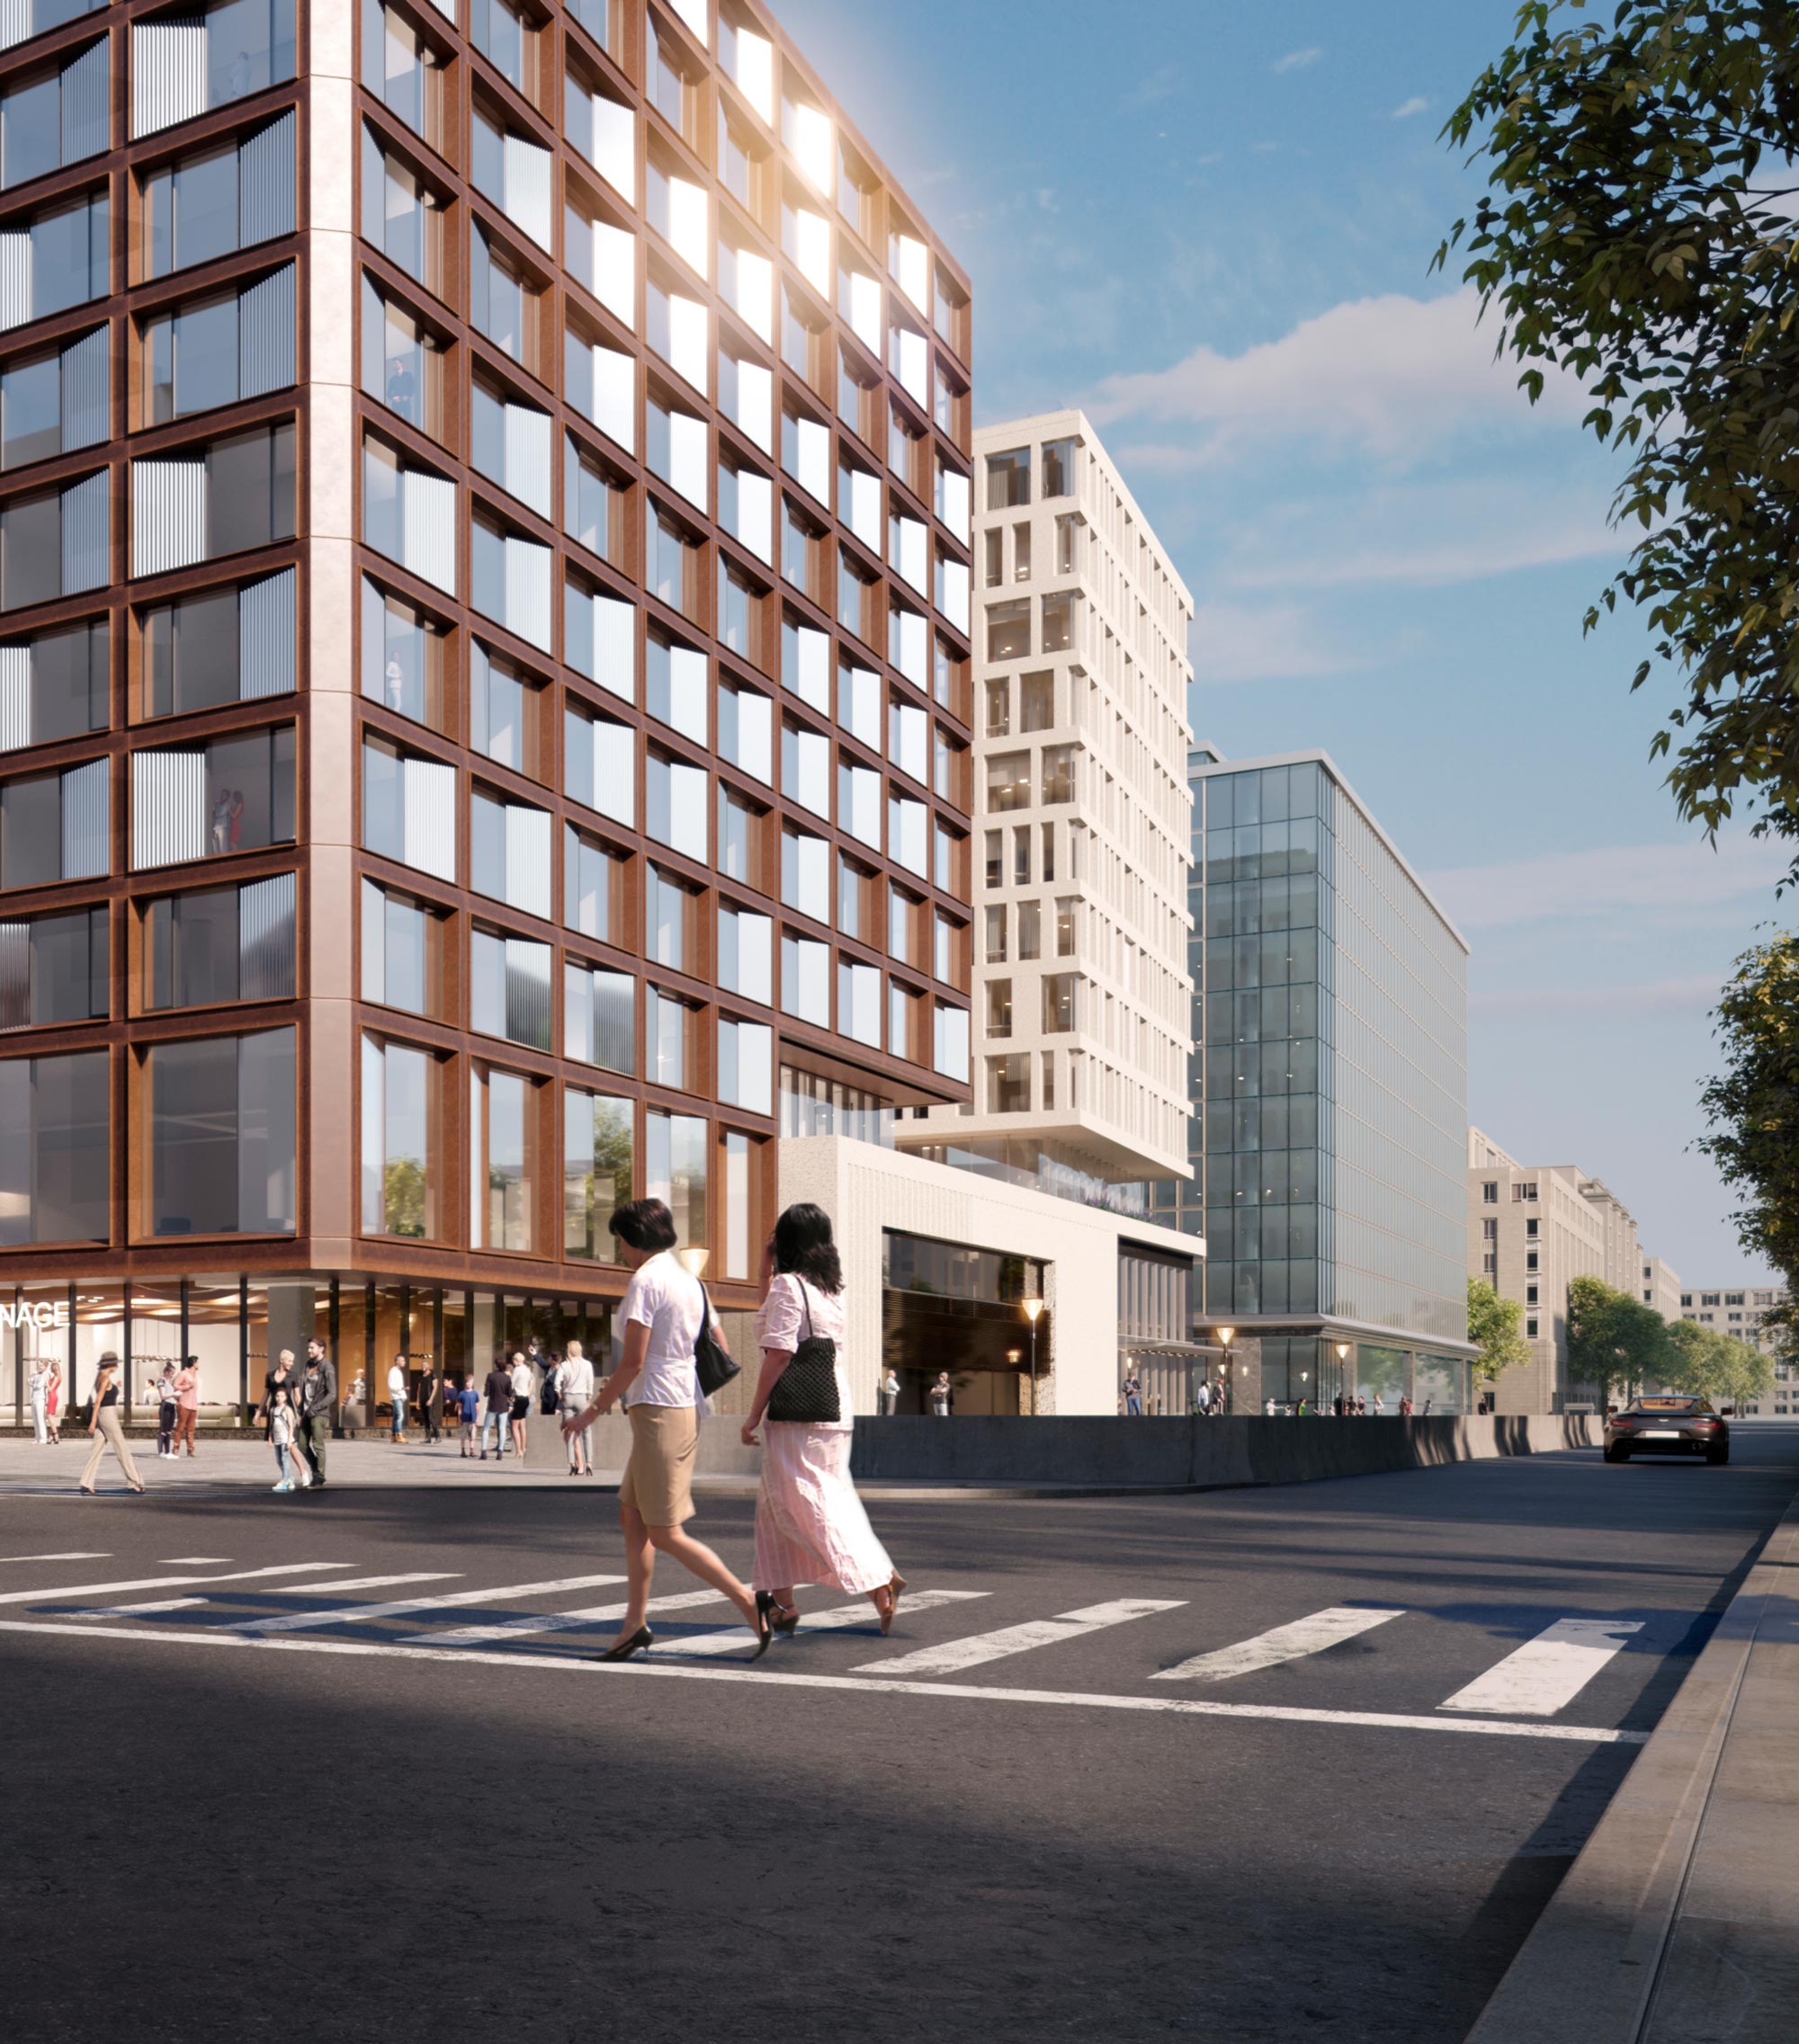 Architectural Rendering of the exterior of the Center Block at Capitol Crossing project located in Washington, DC